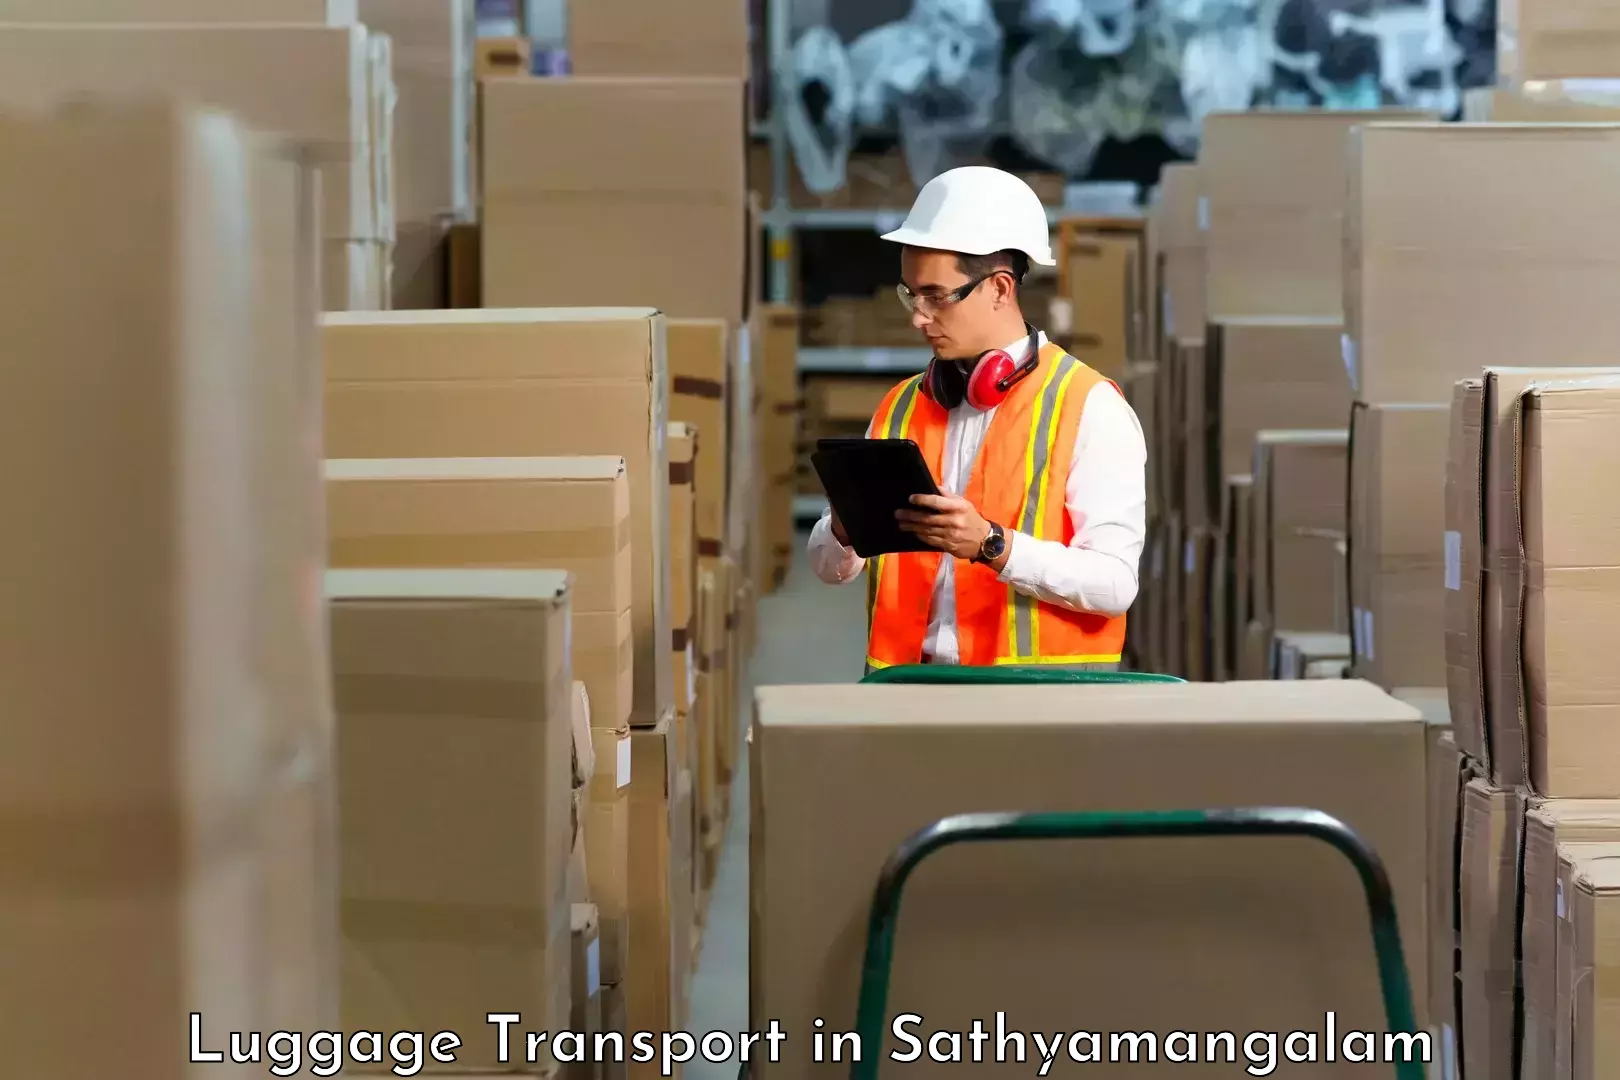 Baggage transport services in Sathyamangalam